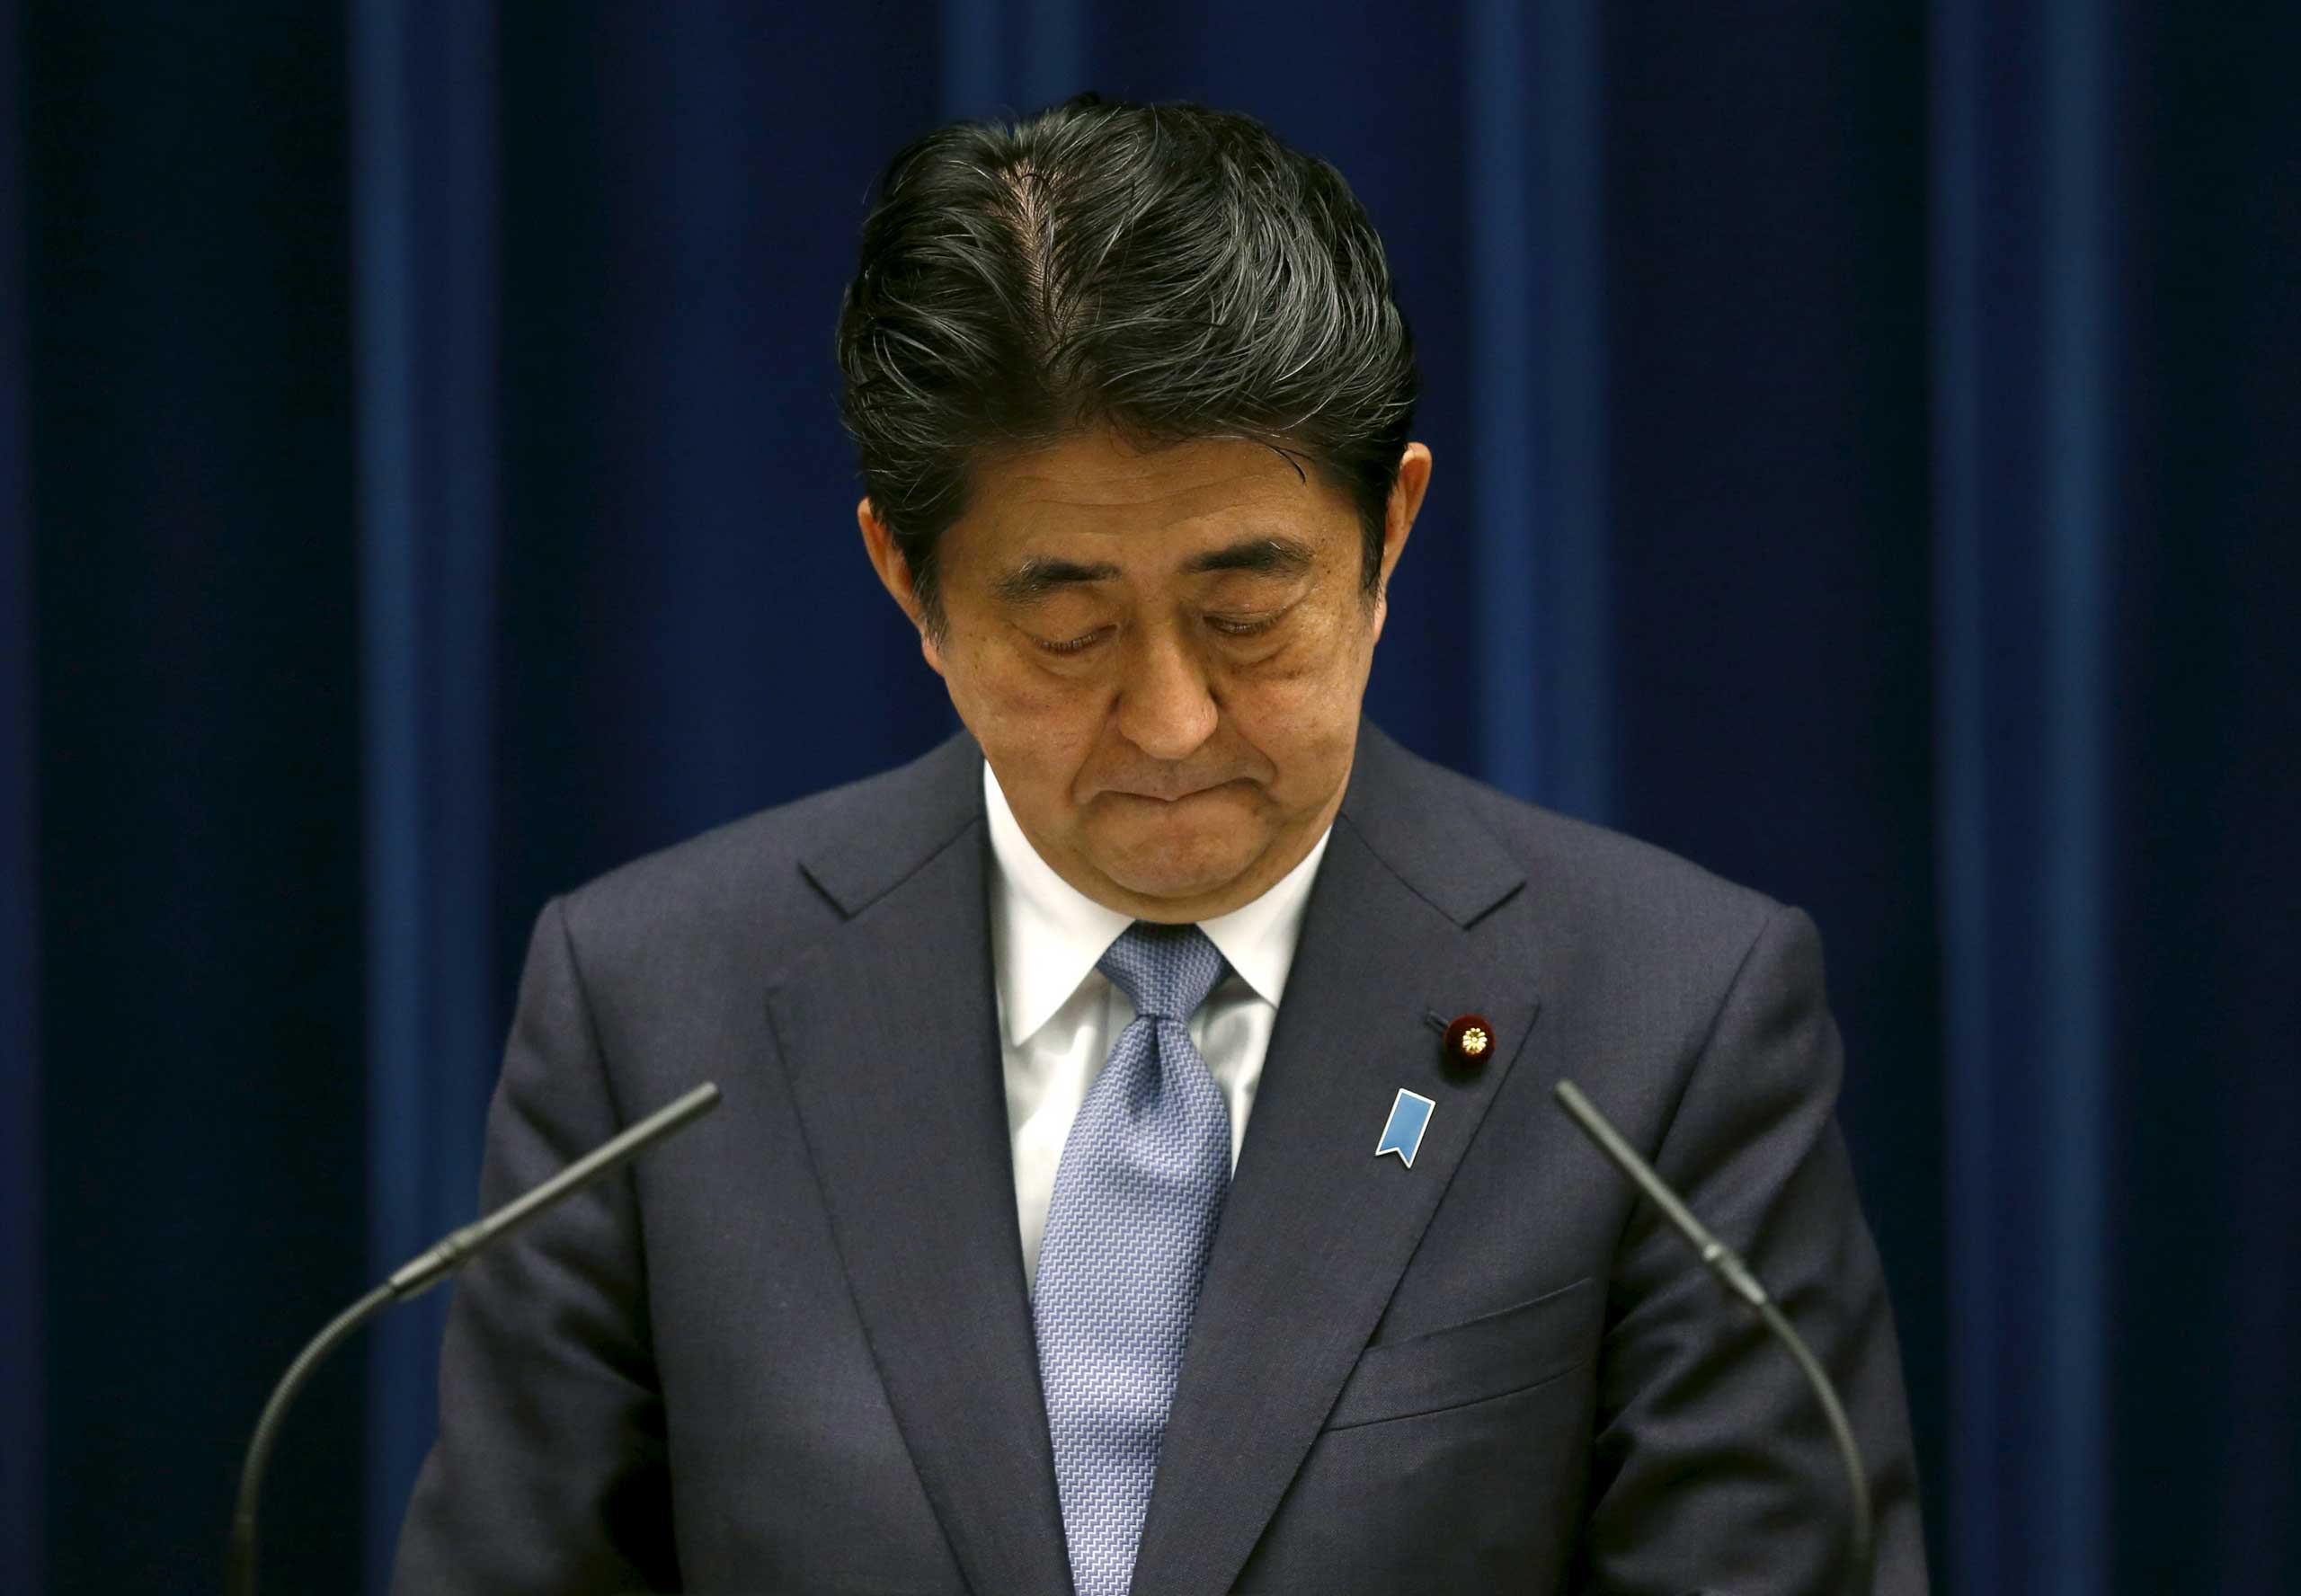 Japan's Prime Minister Shinzo Abe attends a news conference to deliver a statement marking the 70th anniversary of World War Two's end, at his official residence in Tokyo Aug. 14, 2015. (Toru Hanai—Reuters)